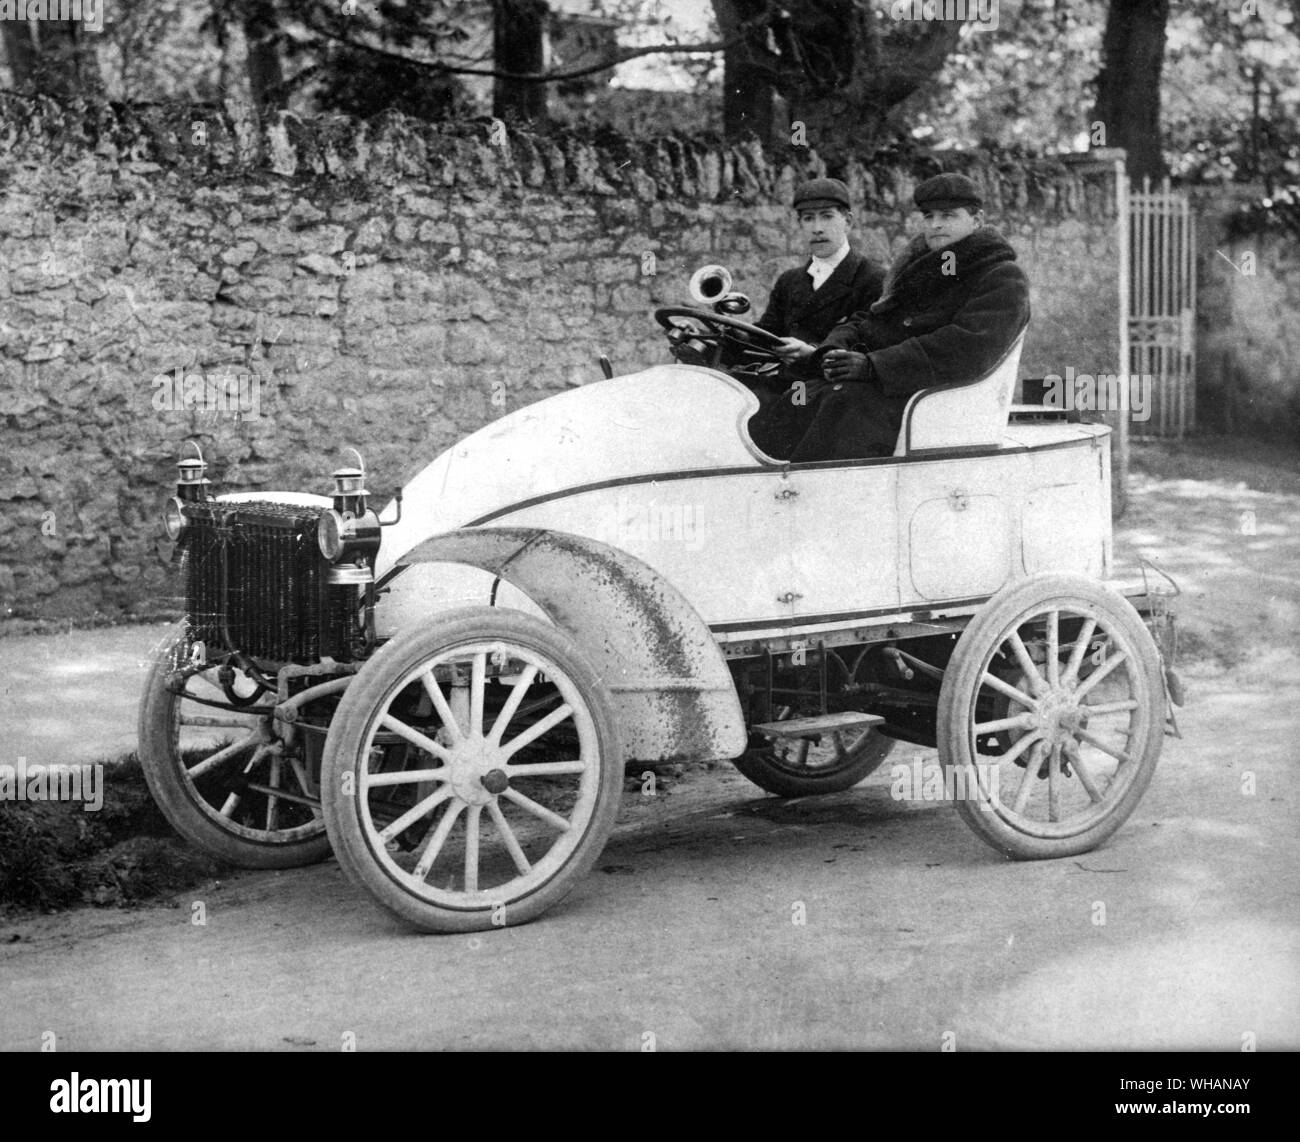 Automobile Black and White Stock Photos & Images - Alamy